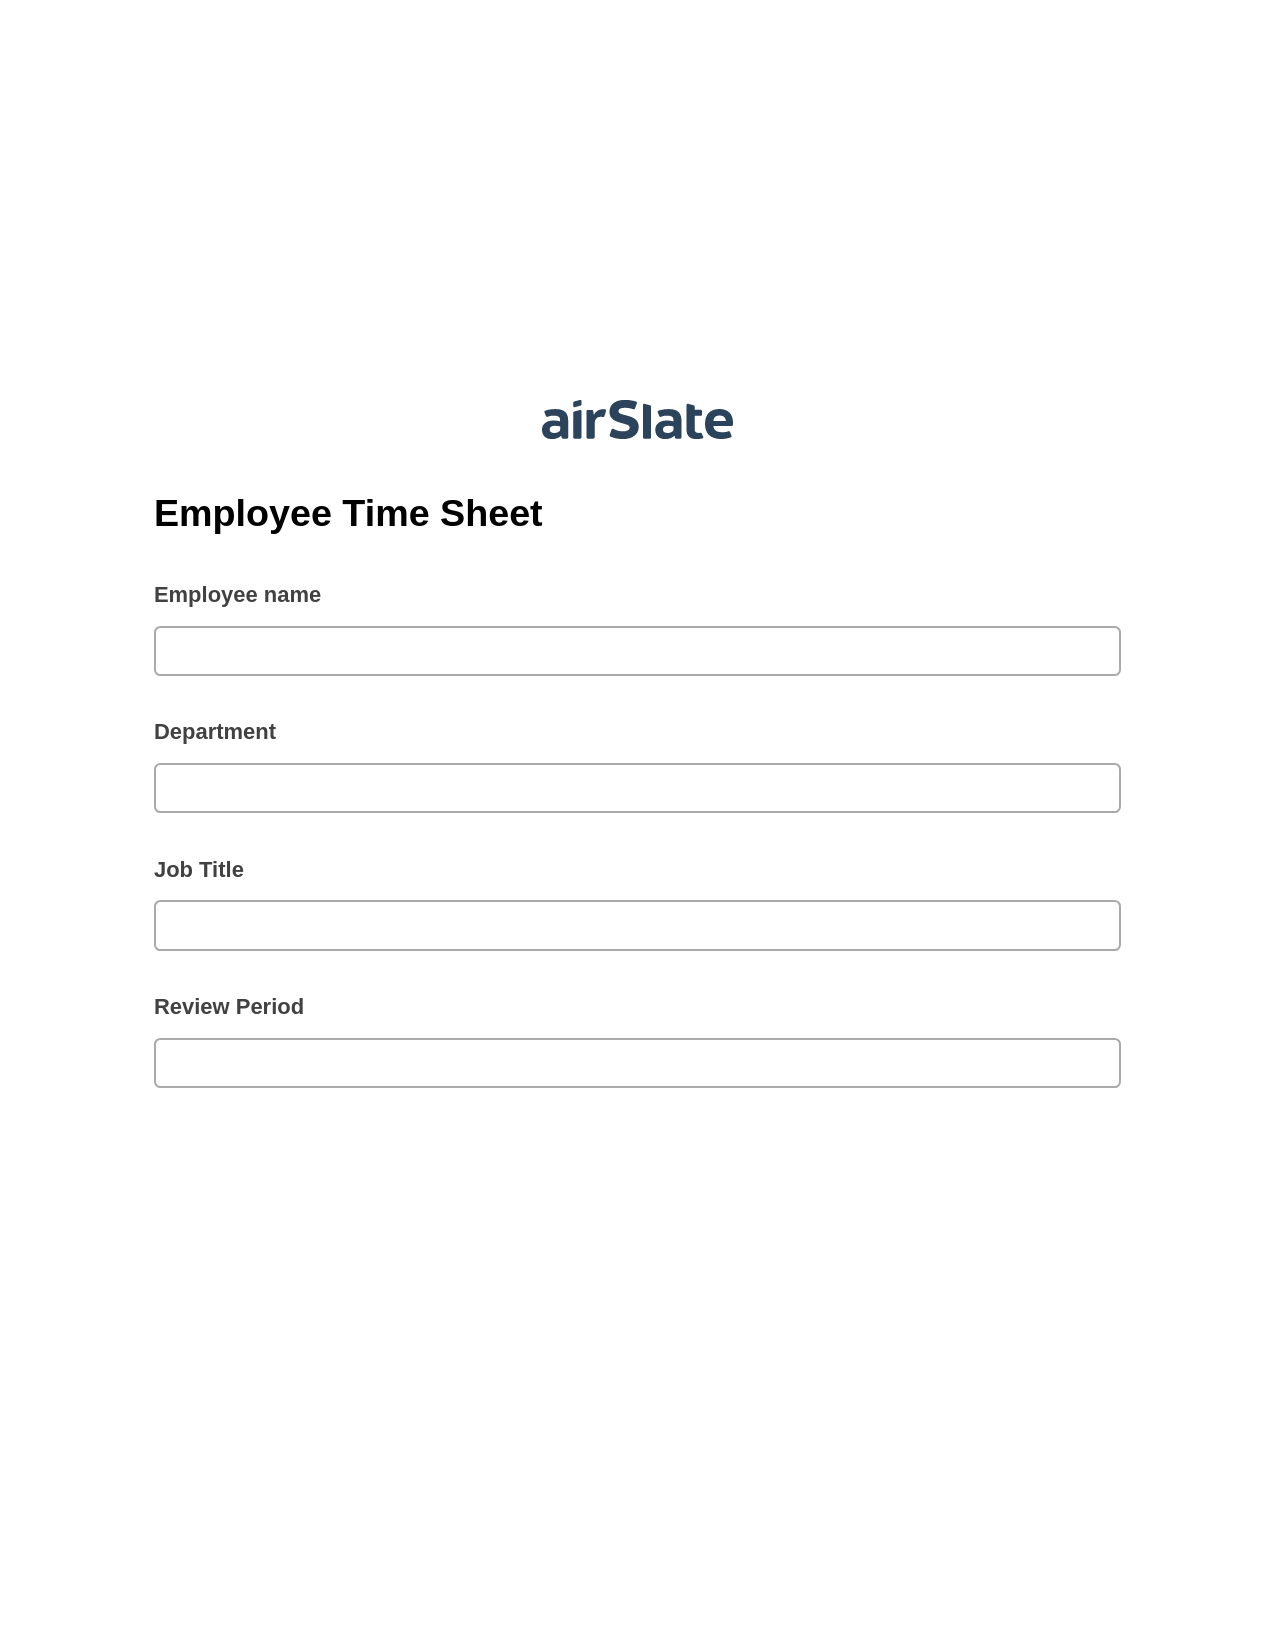 Multirole Employee Time Sheet Pre-fill from Excel Spreadsheet Bot, Update Audit Trail Bot, Email Notification Postfinish Bot